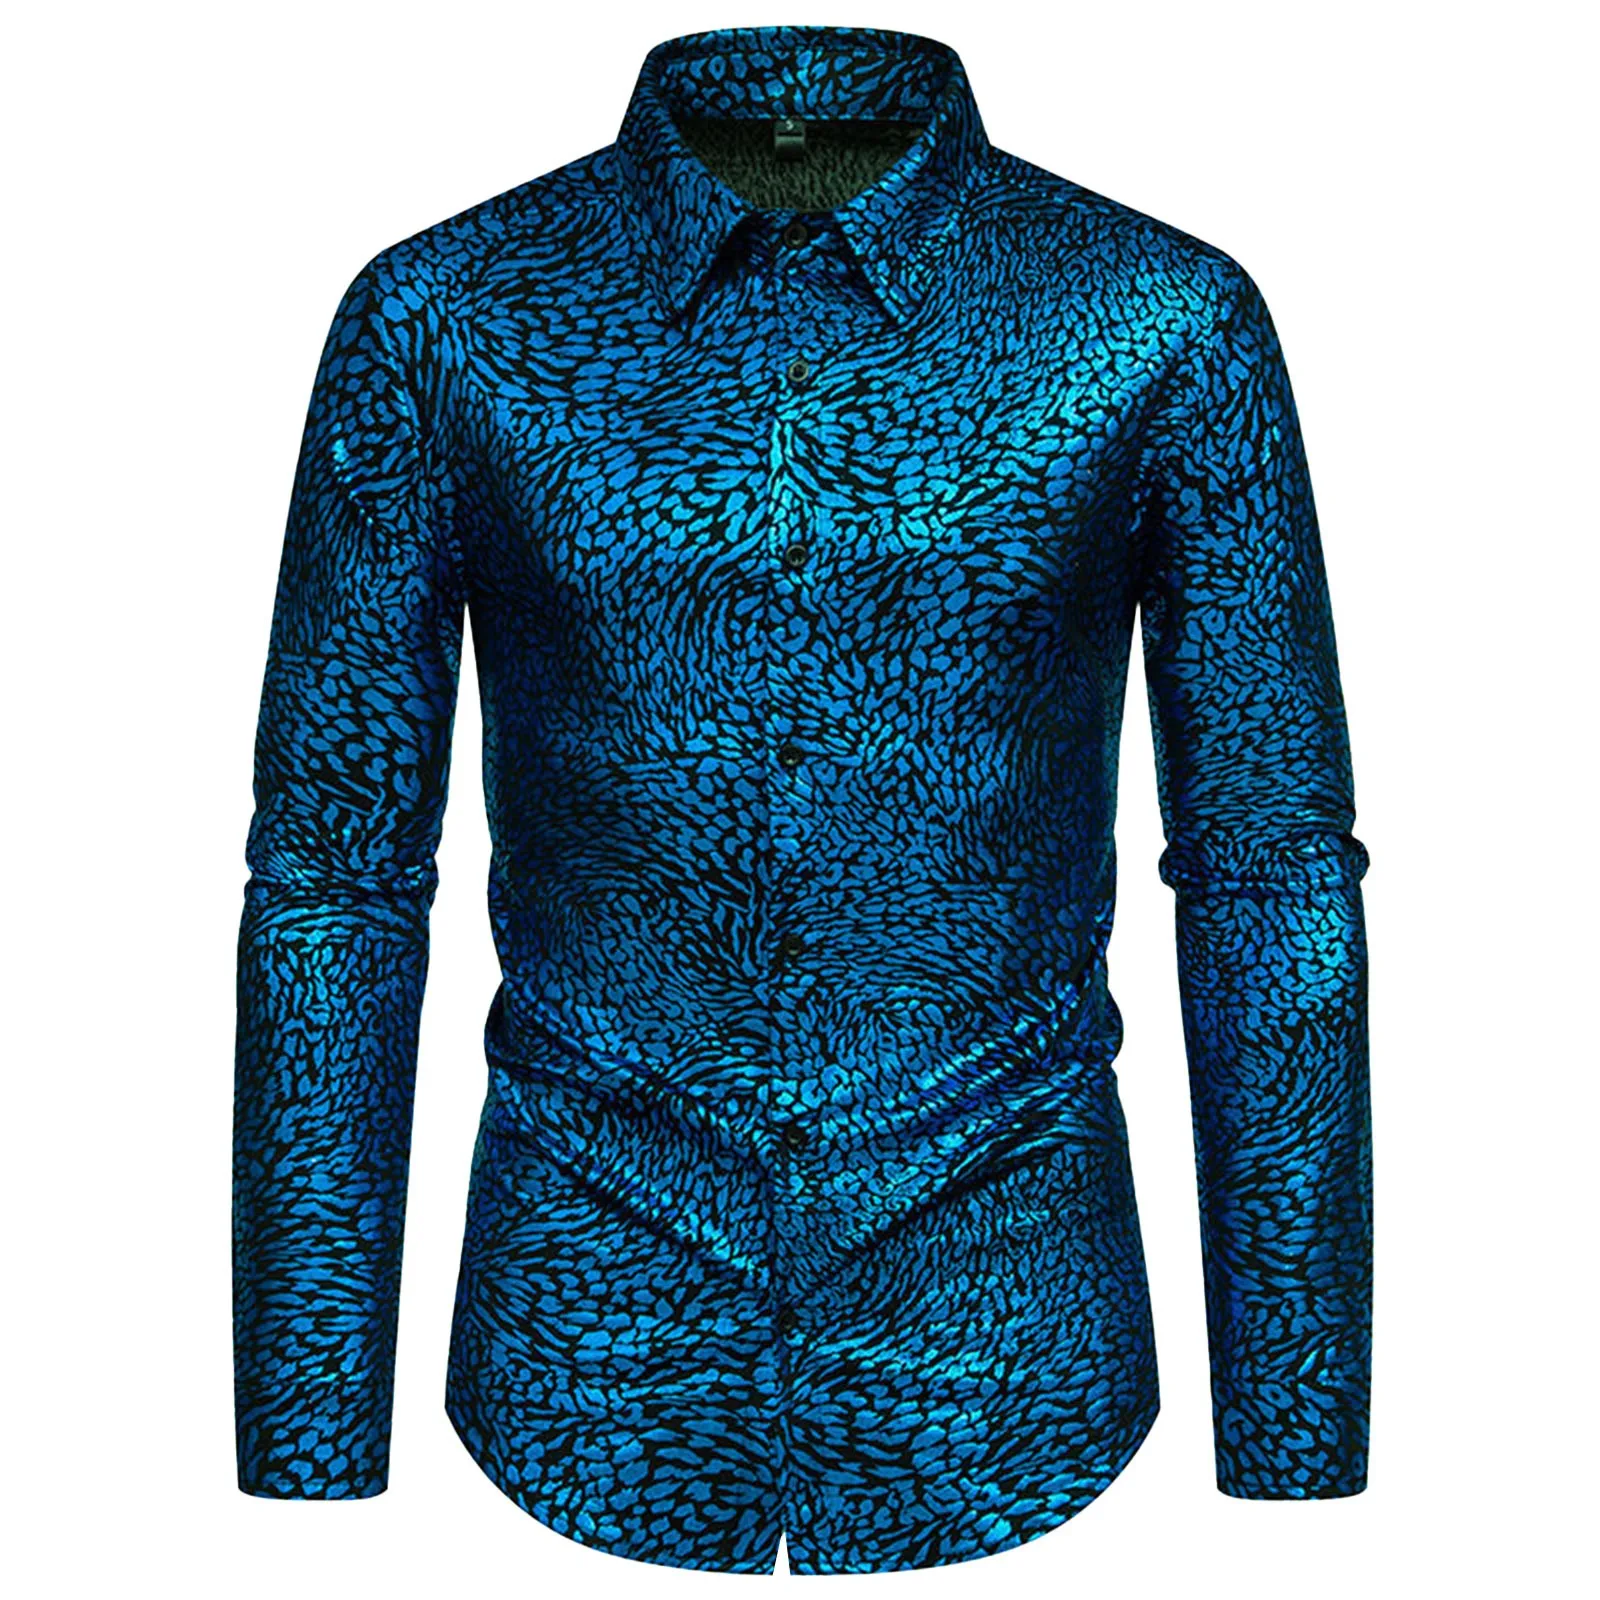 

Mens Hot Stamping Printed Shirt Long Sleeve Slim Fit Lapel Blouse Tops Banquet Fashion Style Single-Breasted Tops For Men